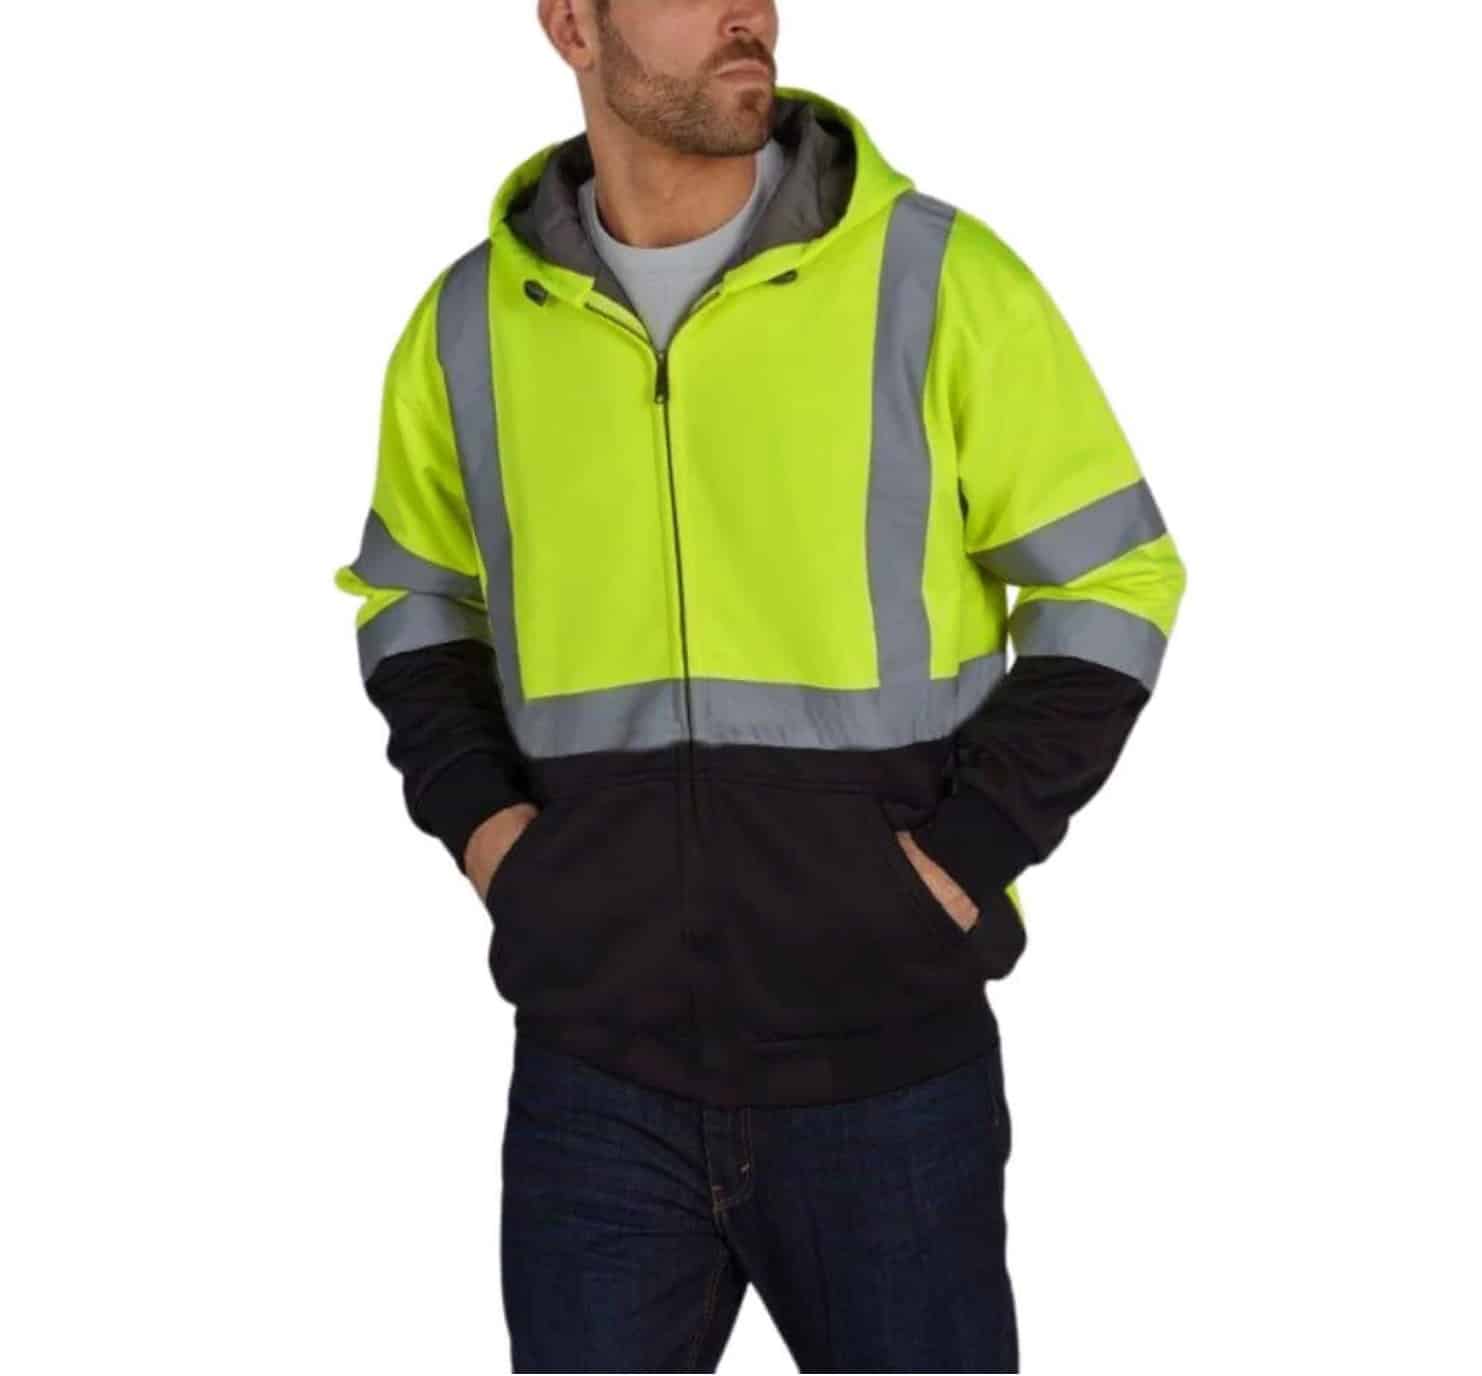 Hoodie, Zip-Up, Soft Shell, Class 3 - UHV425 - North American Safety